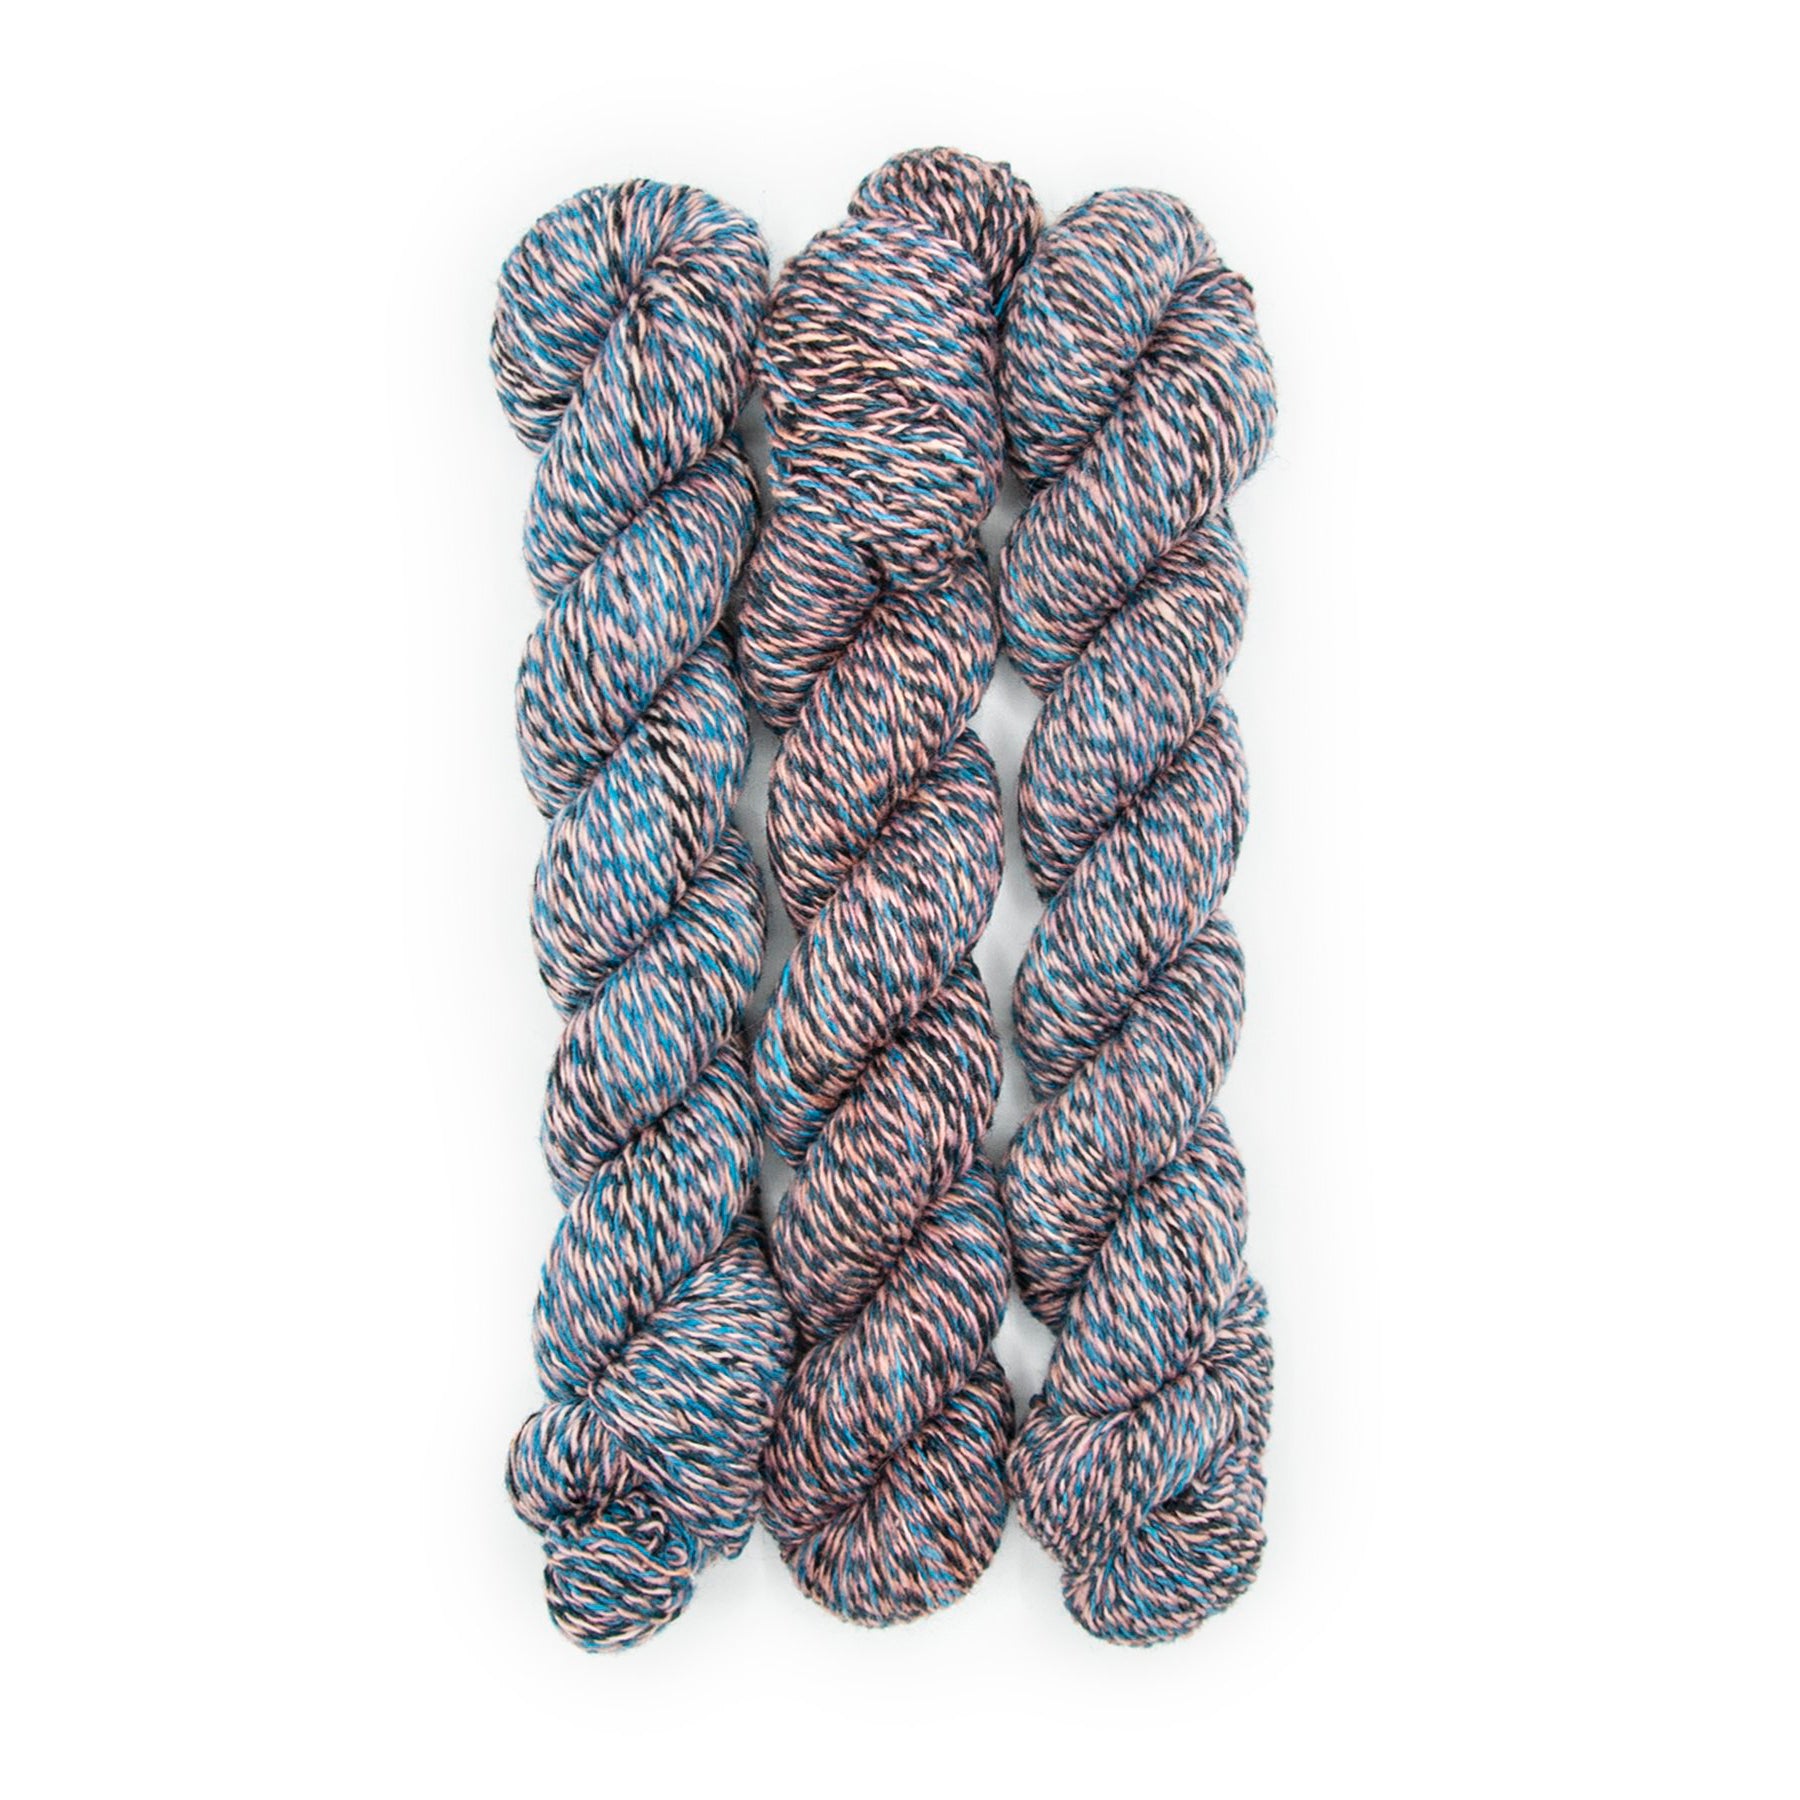 Plied Yarn North Ave Mister a marled yarn with salmon pink, turquoise and dark grey colors.